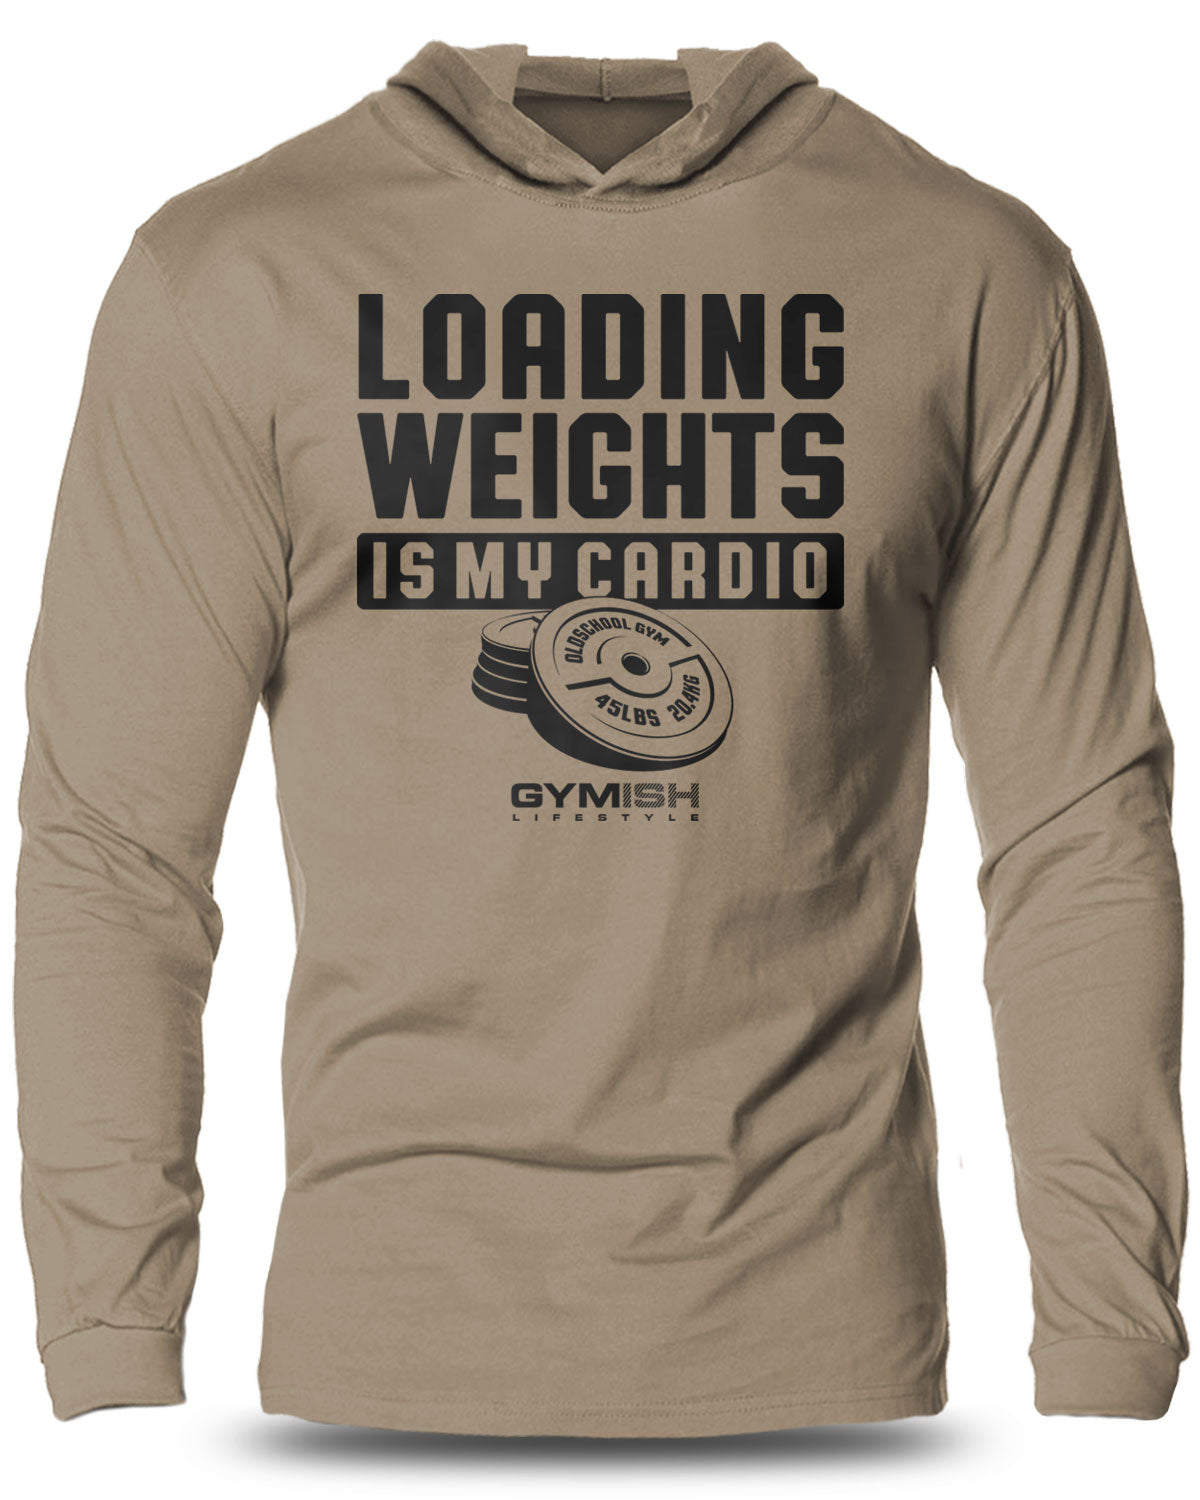 092- Loading Weights Cardio Lightweight Long Sleeve Hooded T-shirt for Men